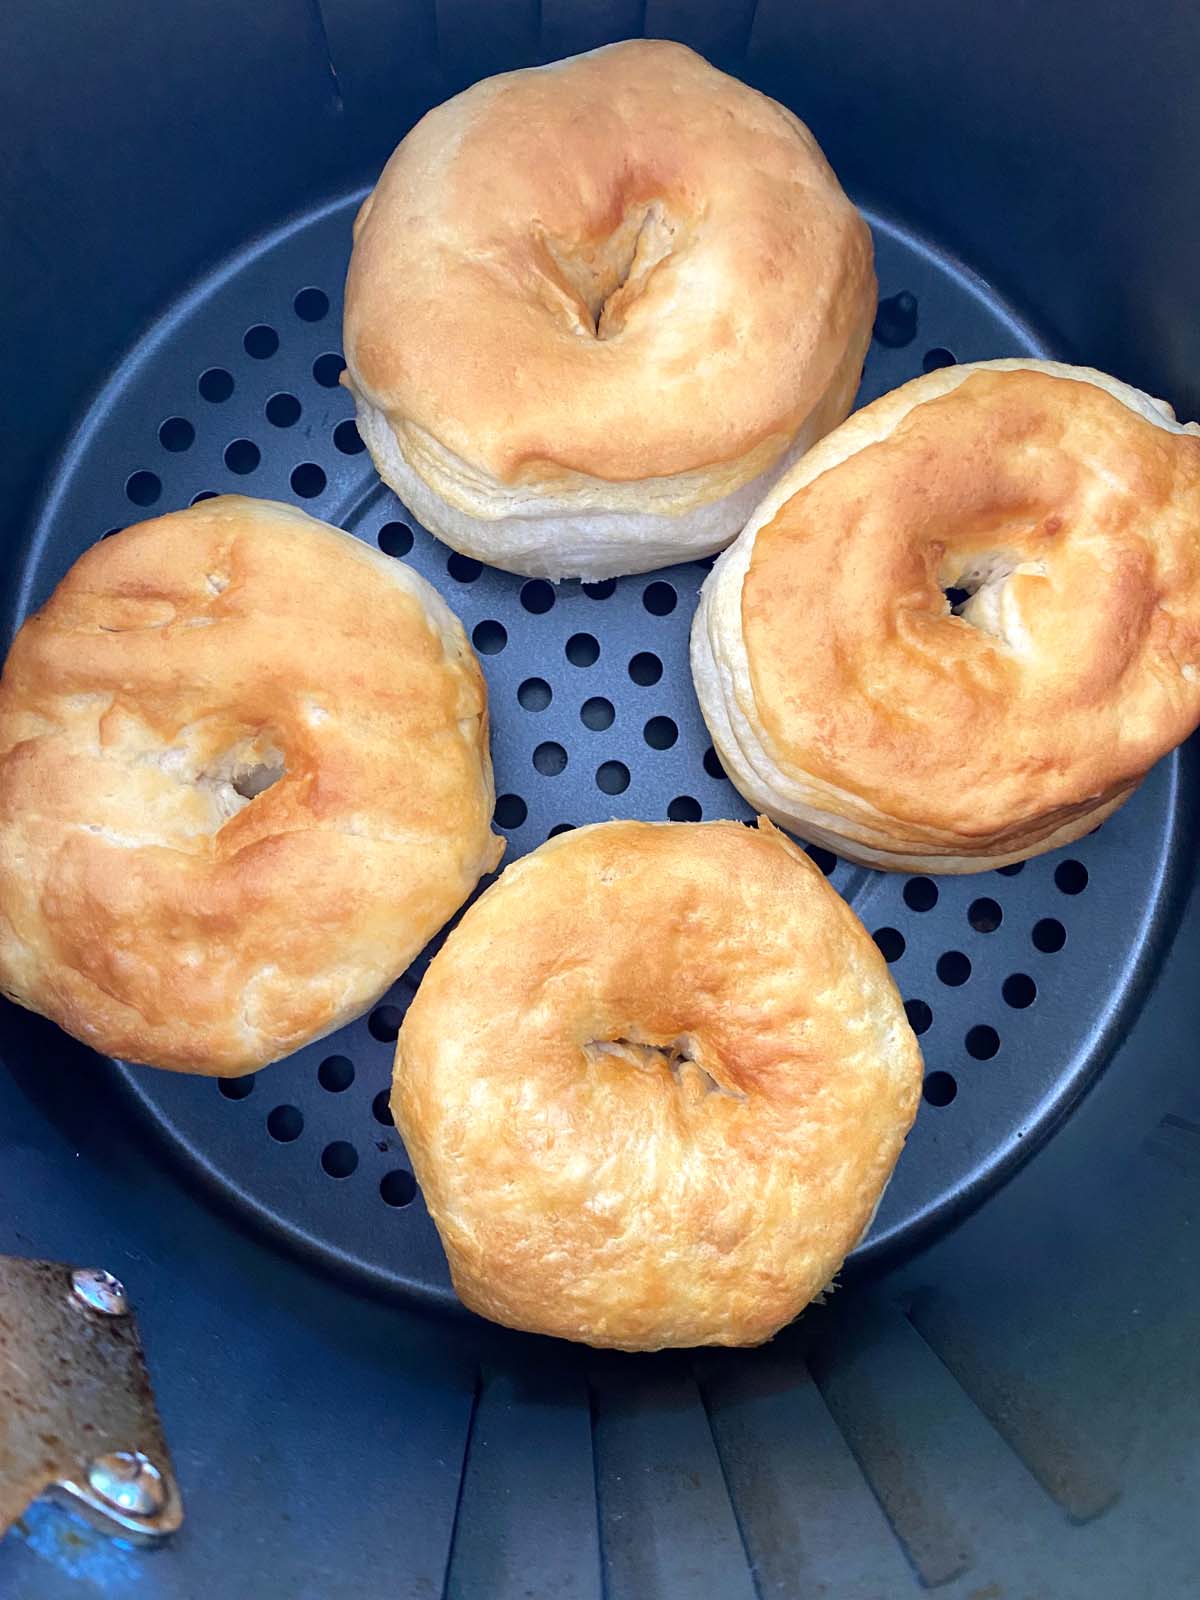 Biscuit donuts in an air fryer.